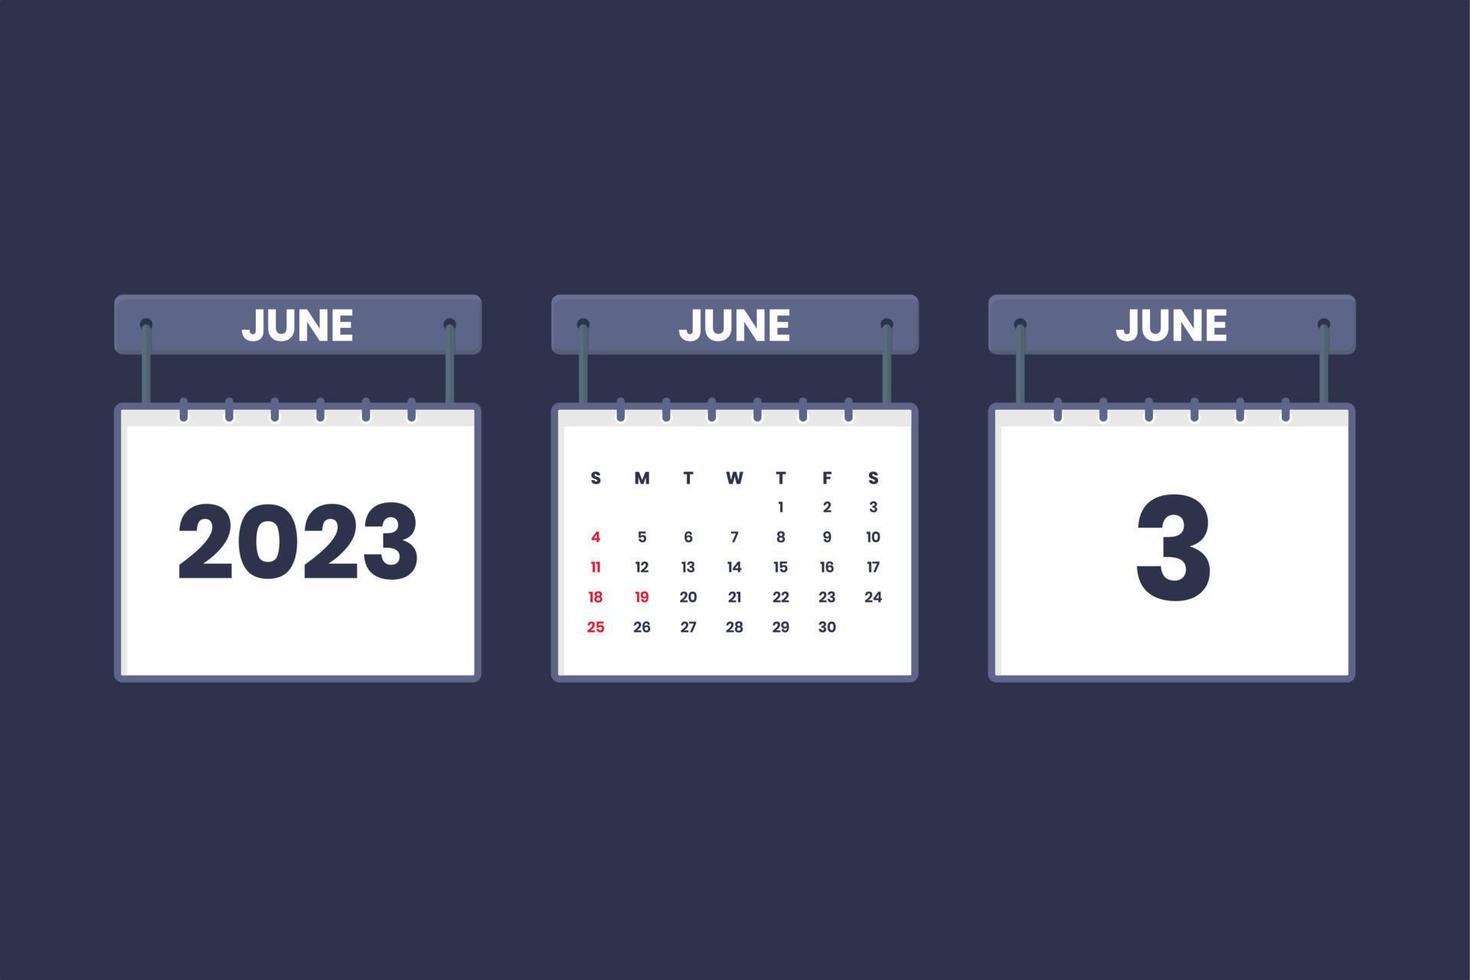 3 June 2023 calendar icon for schedule, appointment, important date concept vector